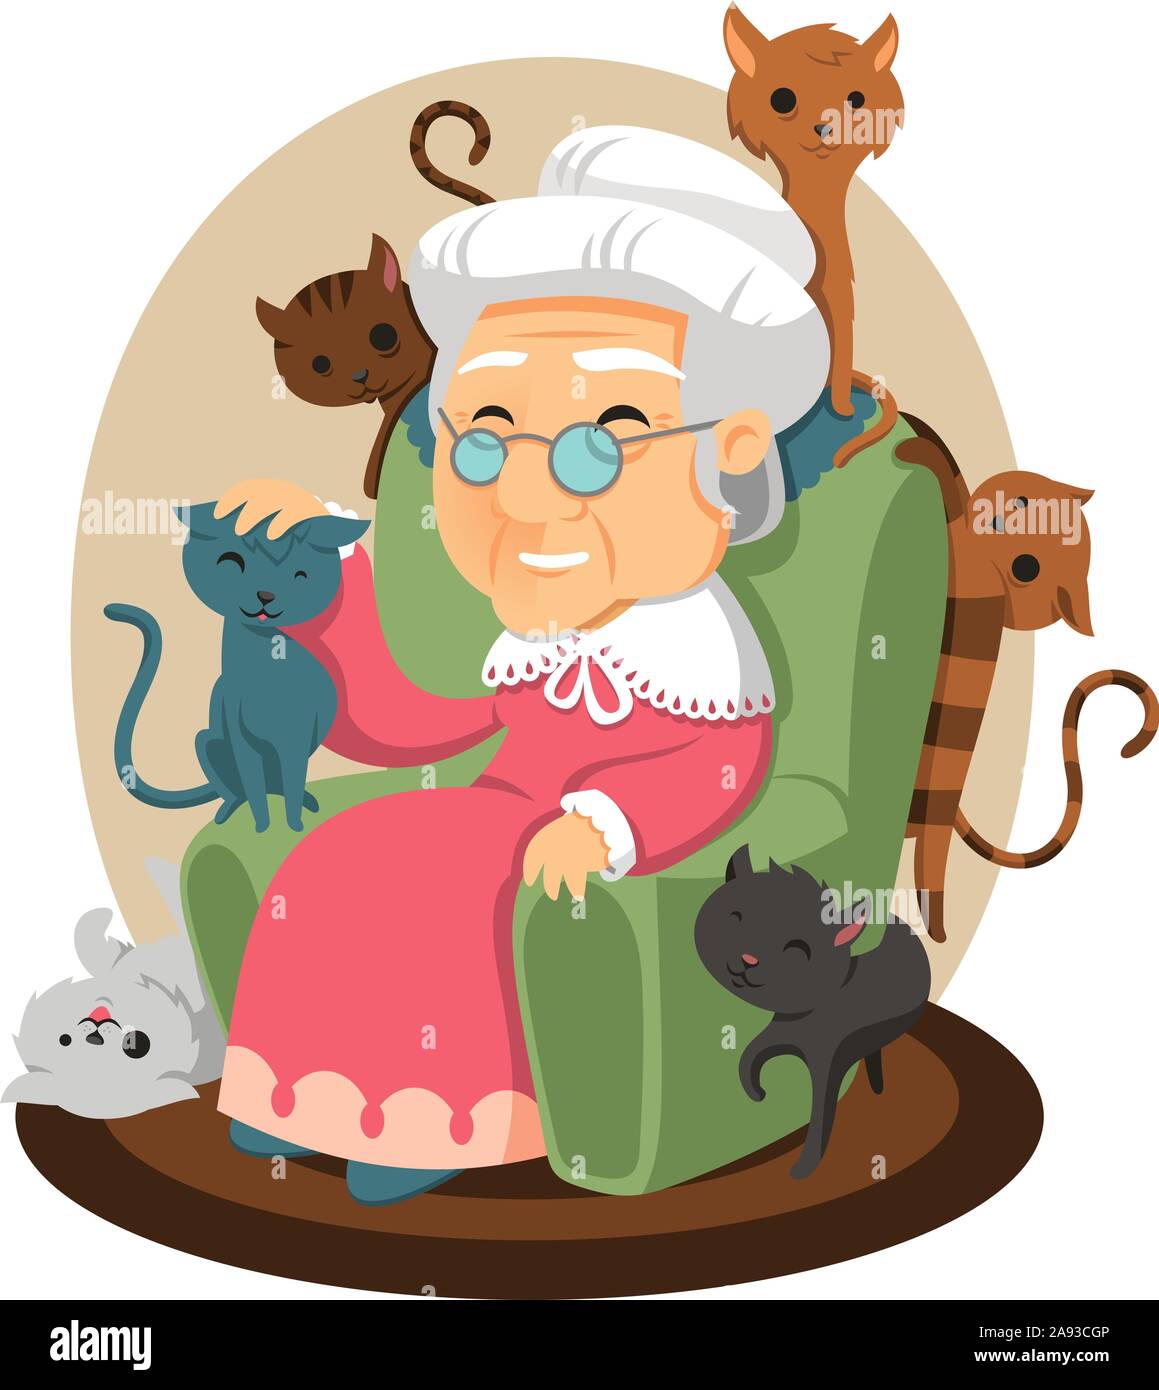 old lady with cats all over cartoon illustration Stock Vector